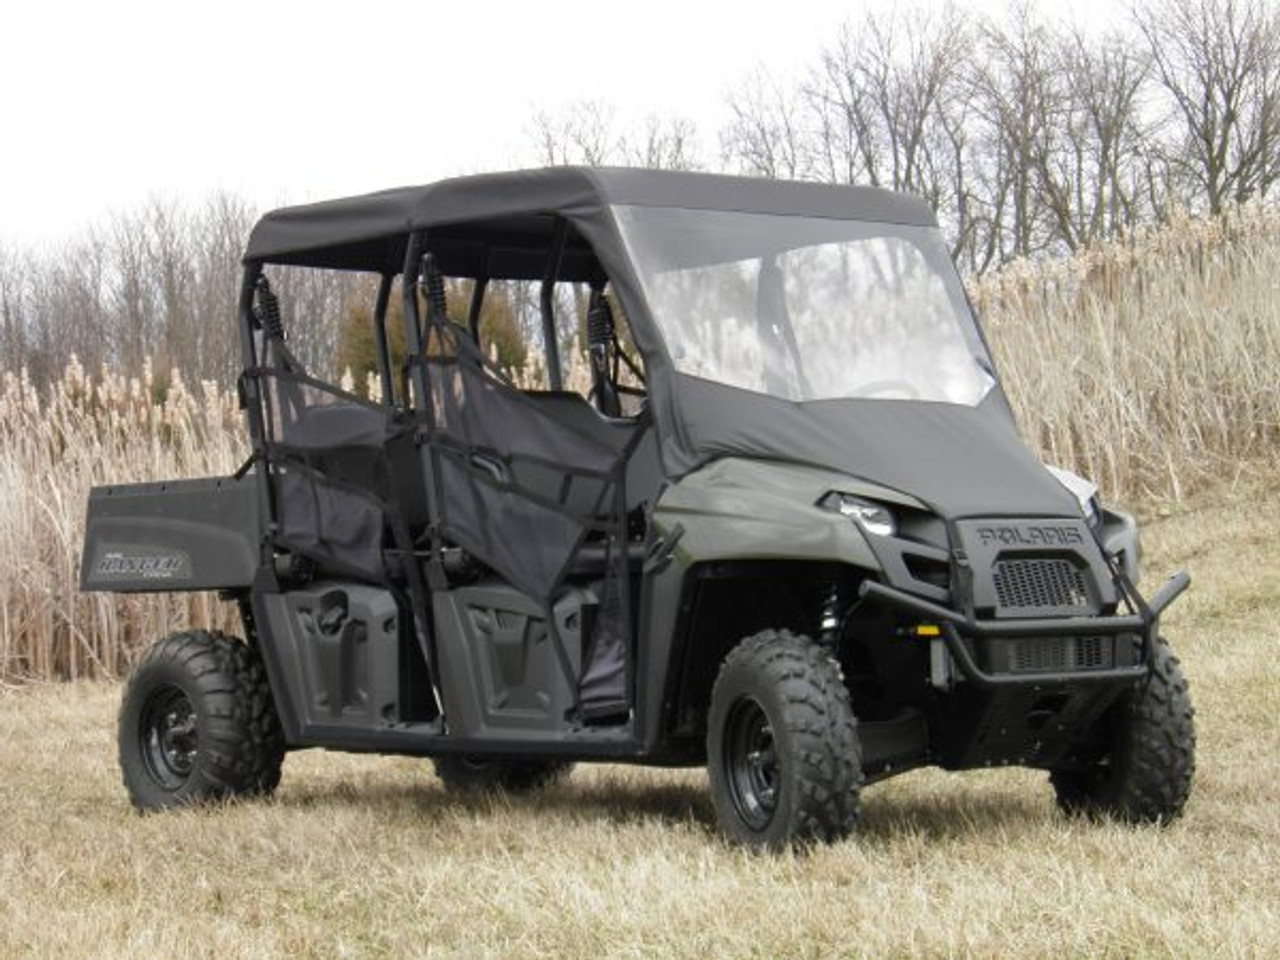 3 Star side x side Polaris Ranger Mid-Size Crew 500/570 vinyl windshield and top front and side angle view